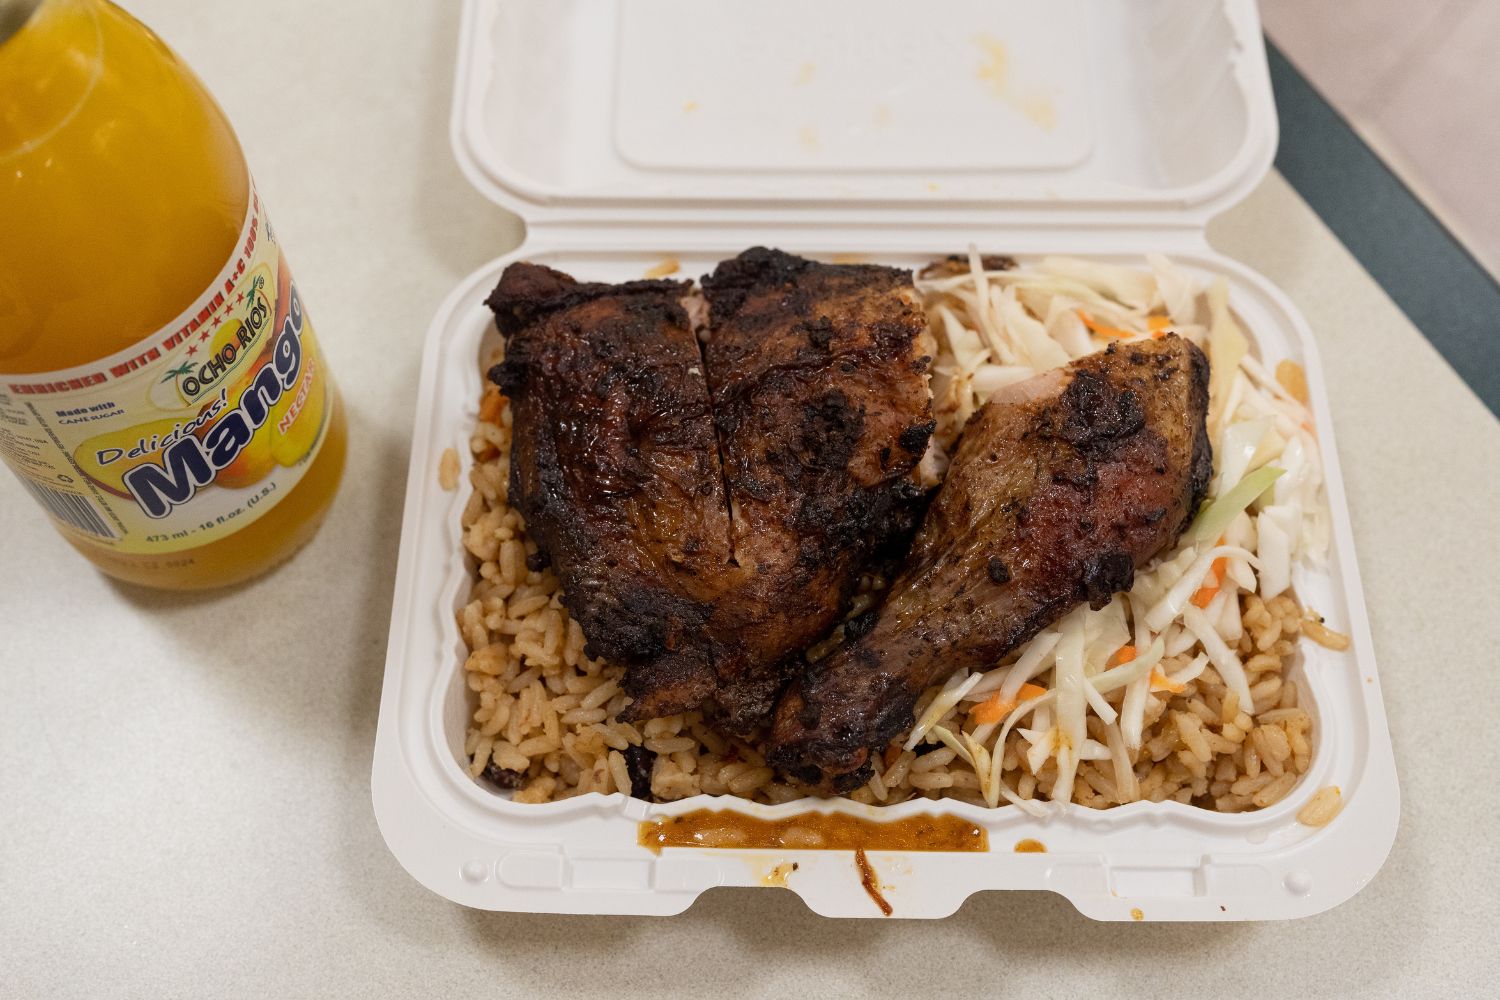 The jerk chicken, Anantram says, is their number one seller. 